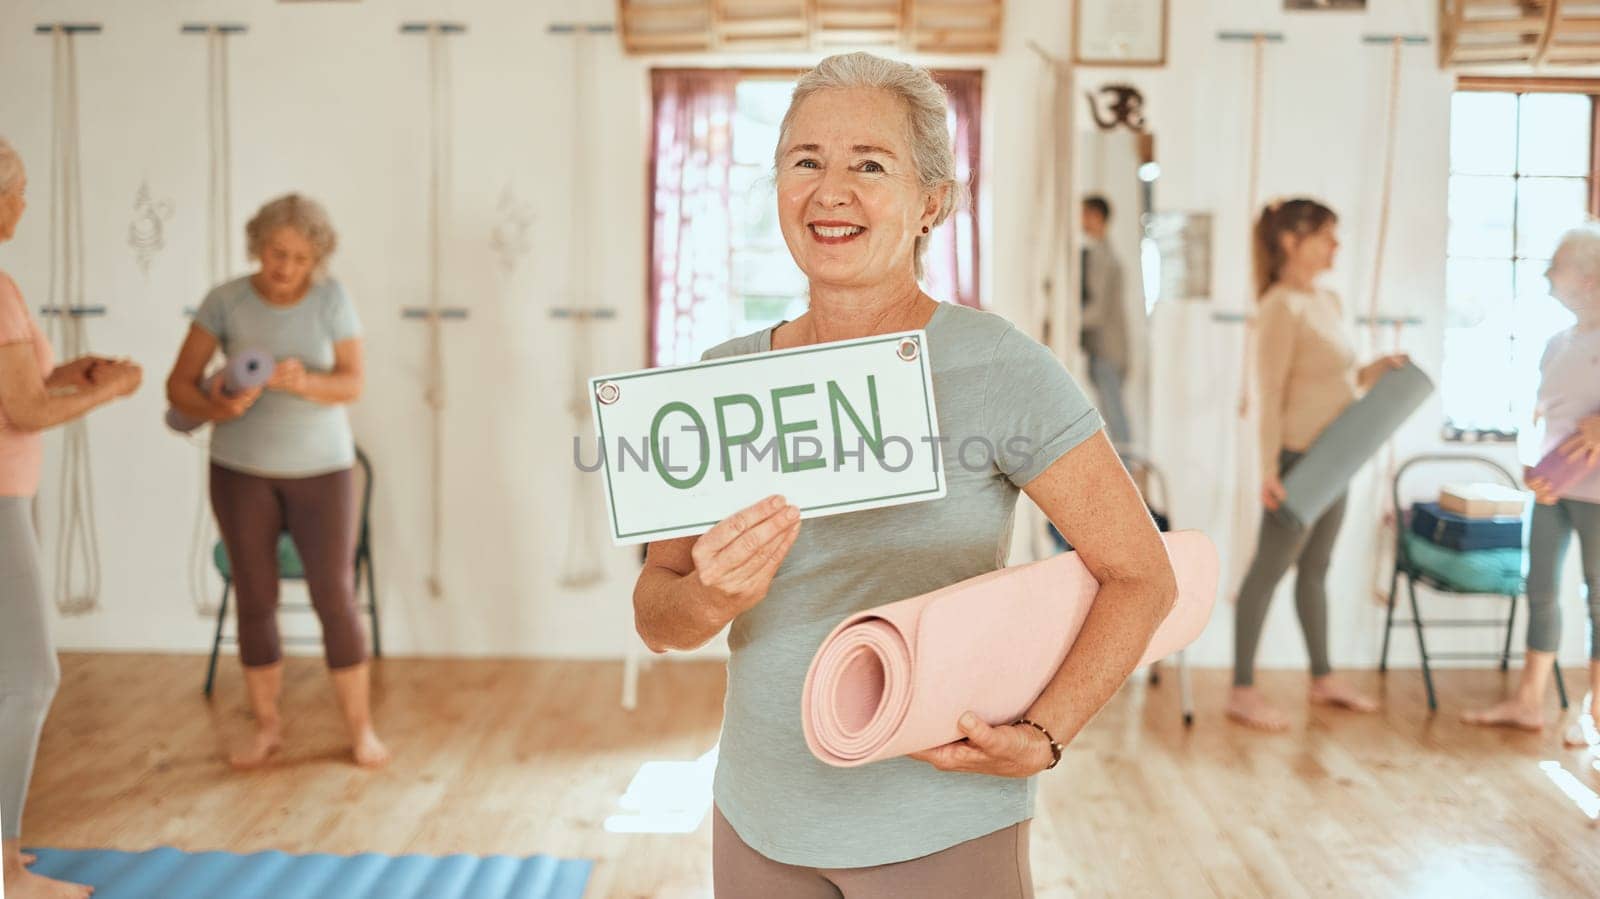 Yoga, open sign and elderly woman in studio with fitness for mature women, exercise and pilates for health and wellness. Balance, zen and workout portrait, training motivation for senior people